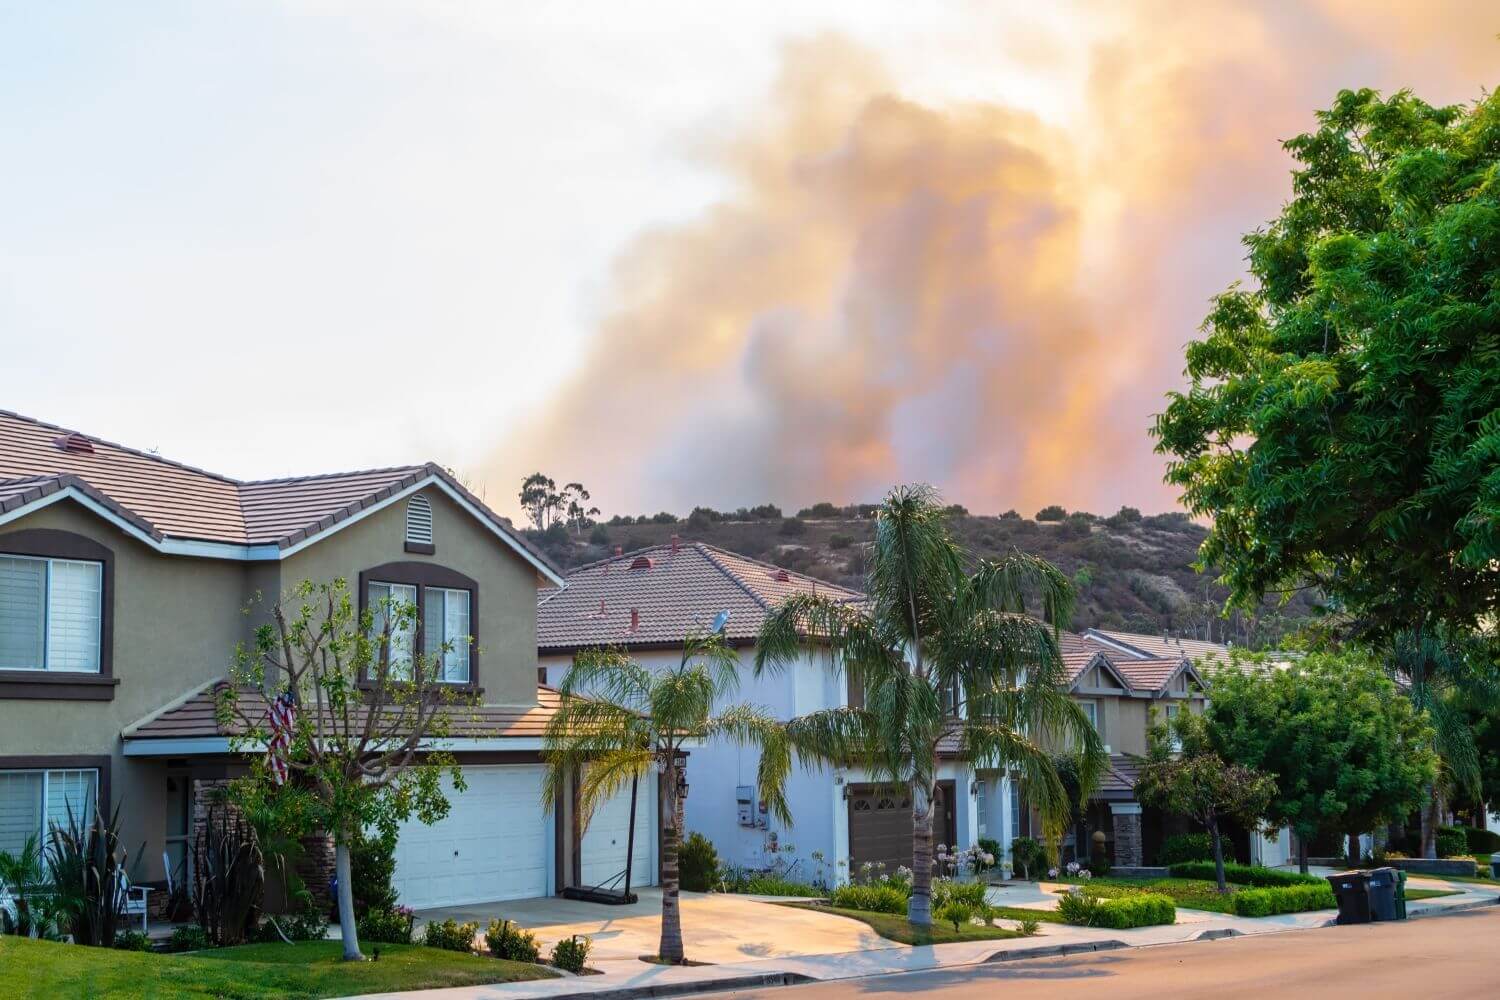 How to Protect Your Roof In Ventura County For Fire Season